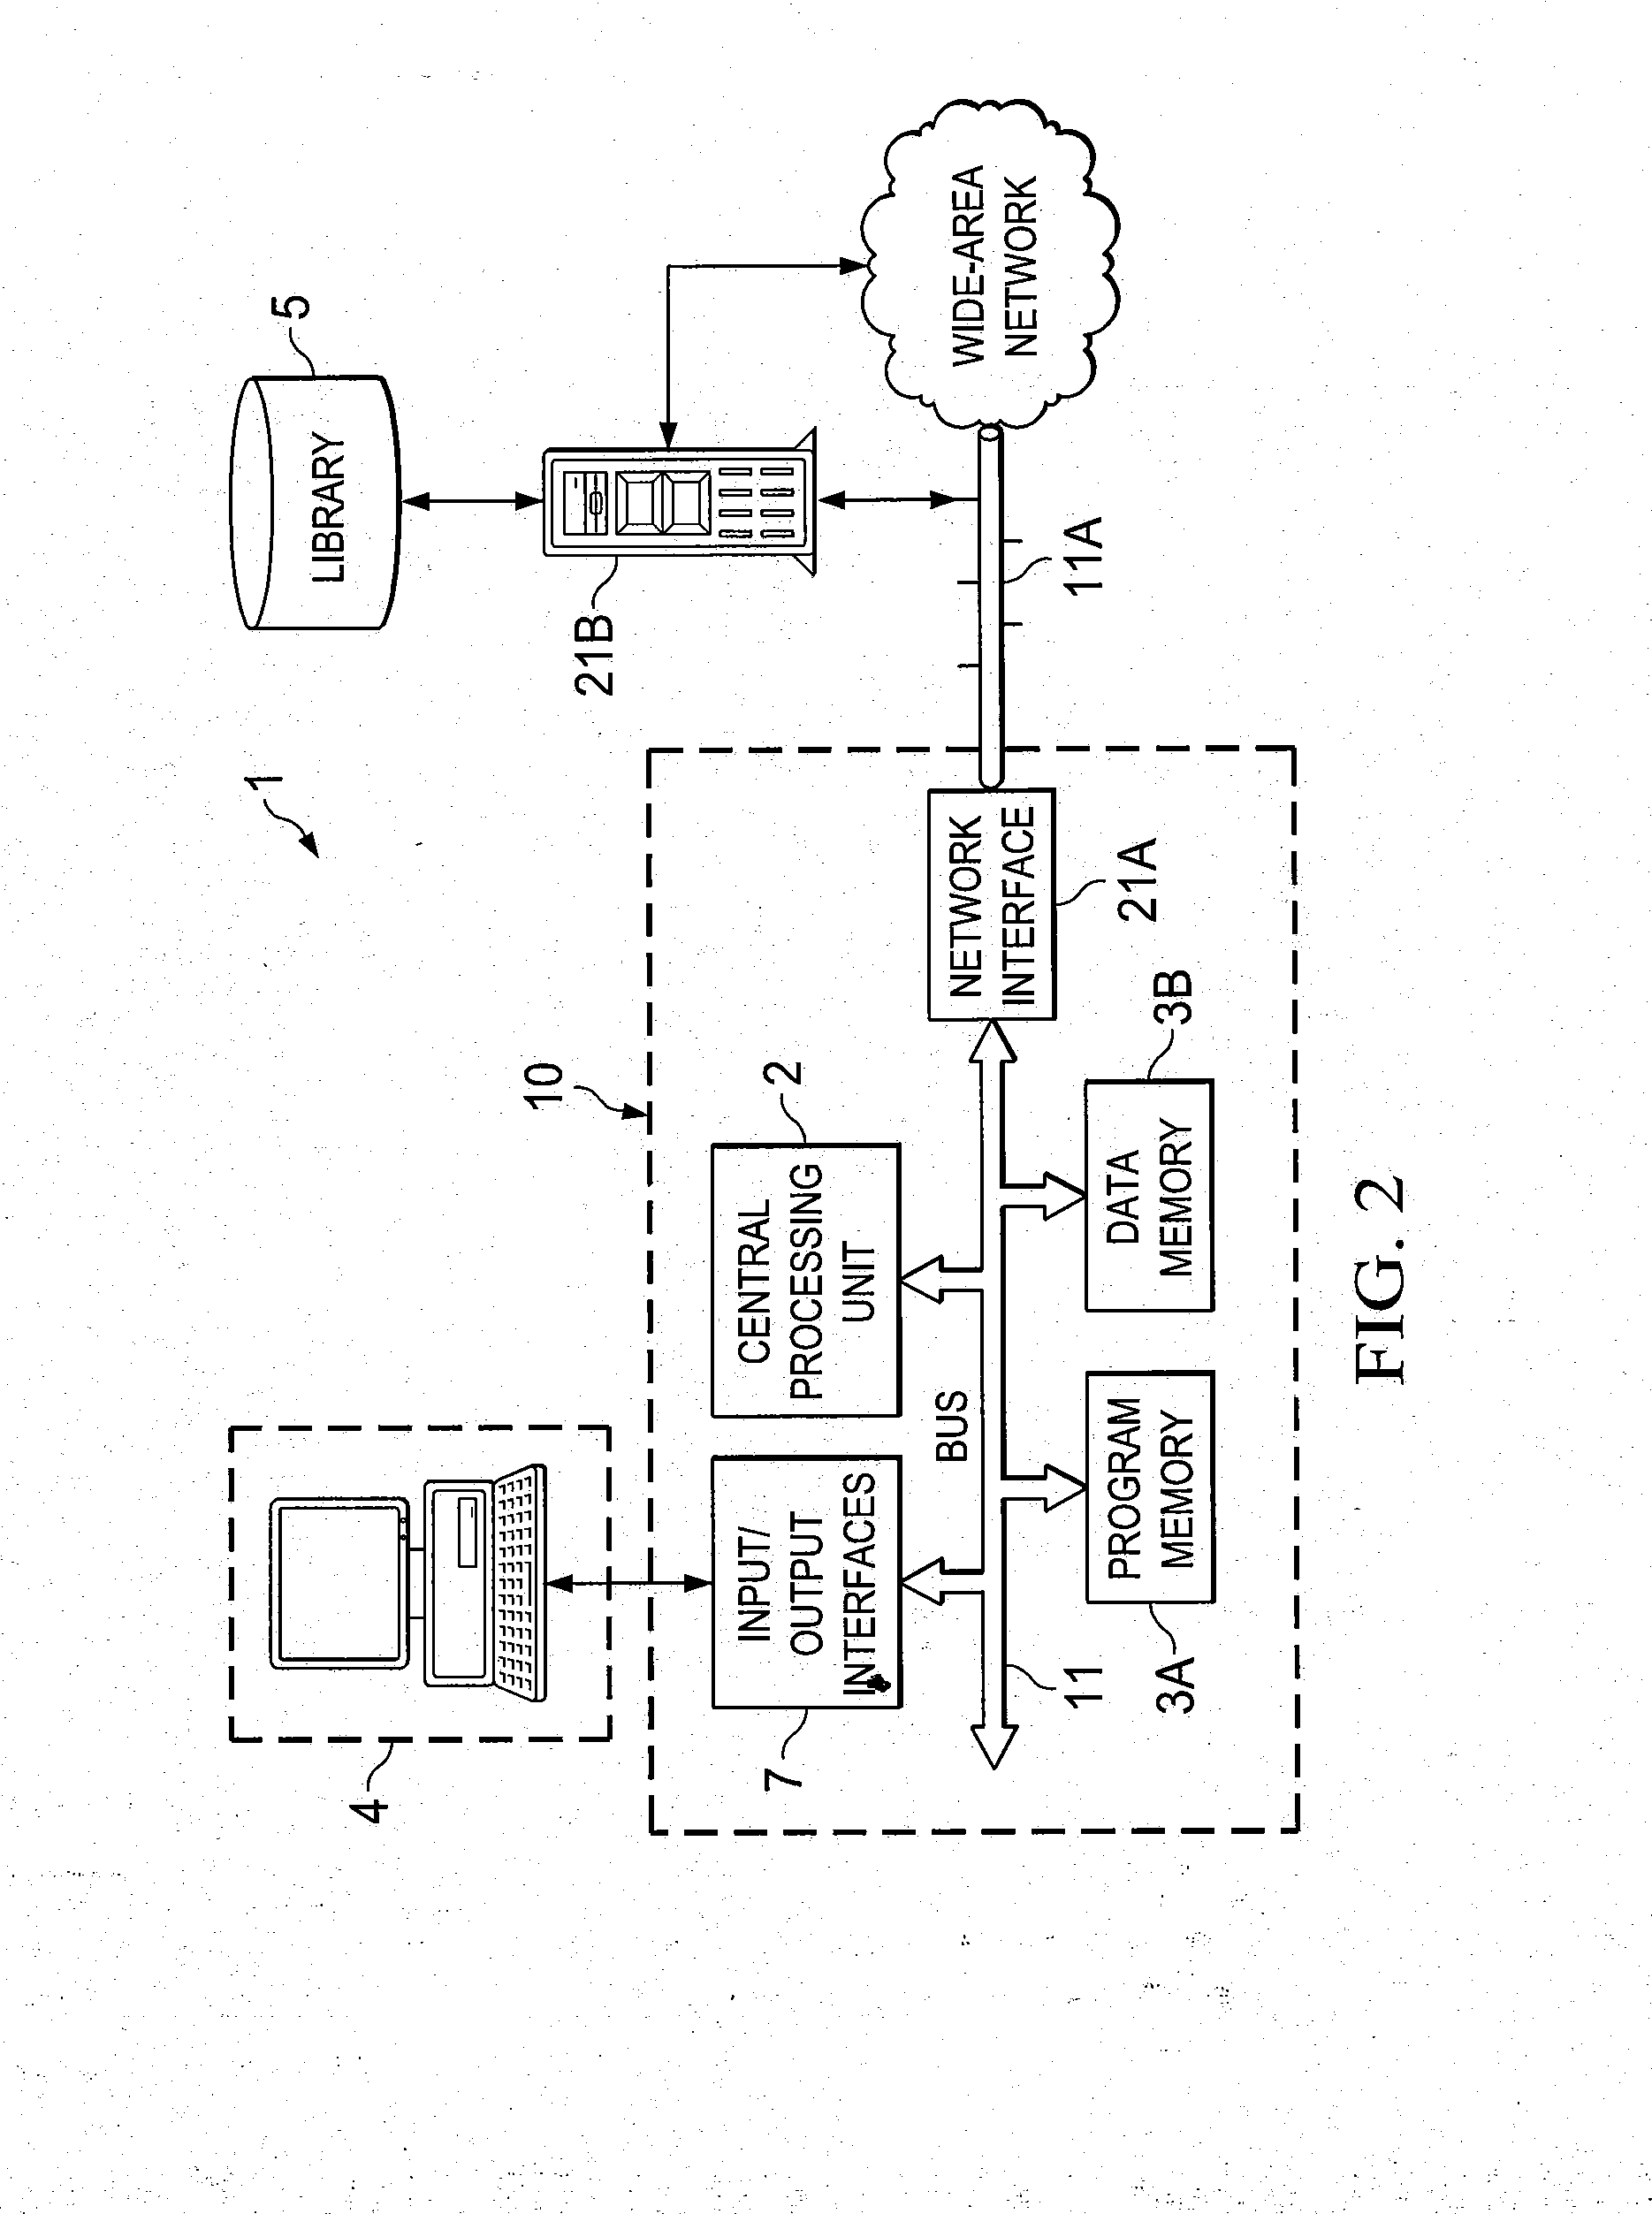 Method For Simulating Circuitry By Dynamically Modifying Device Models That Are Problematic For Out-of-Range Voltages